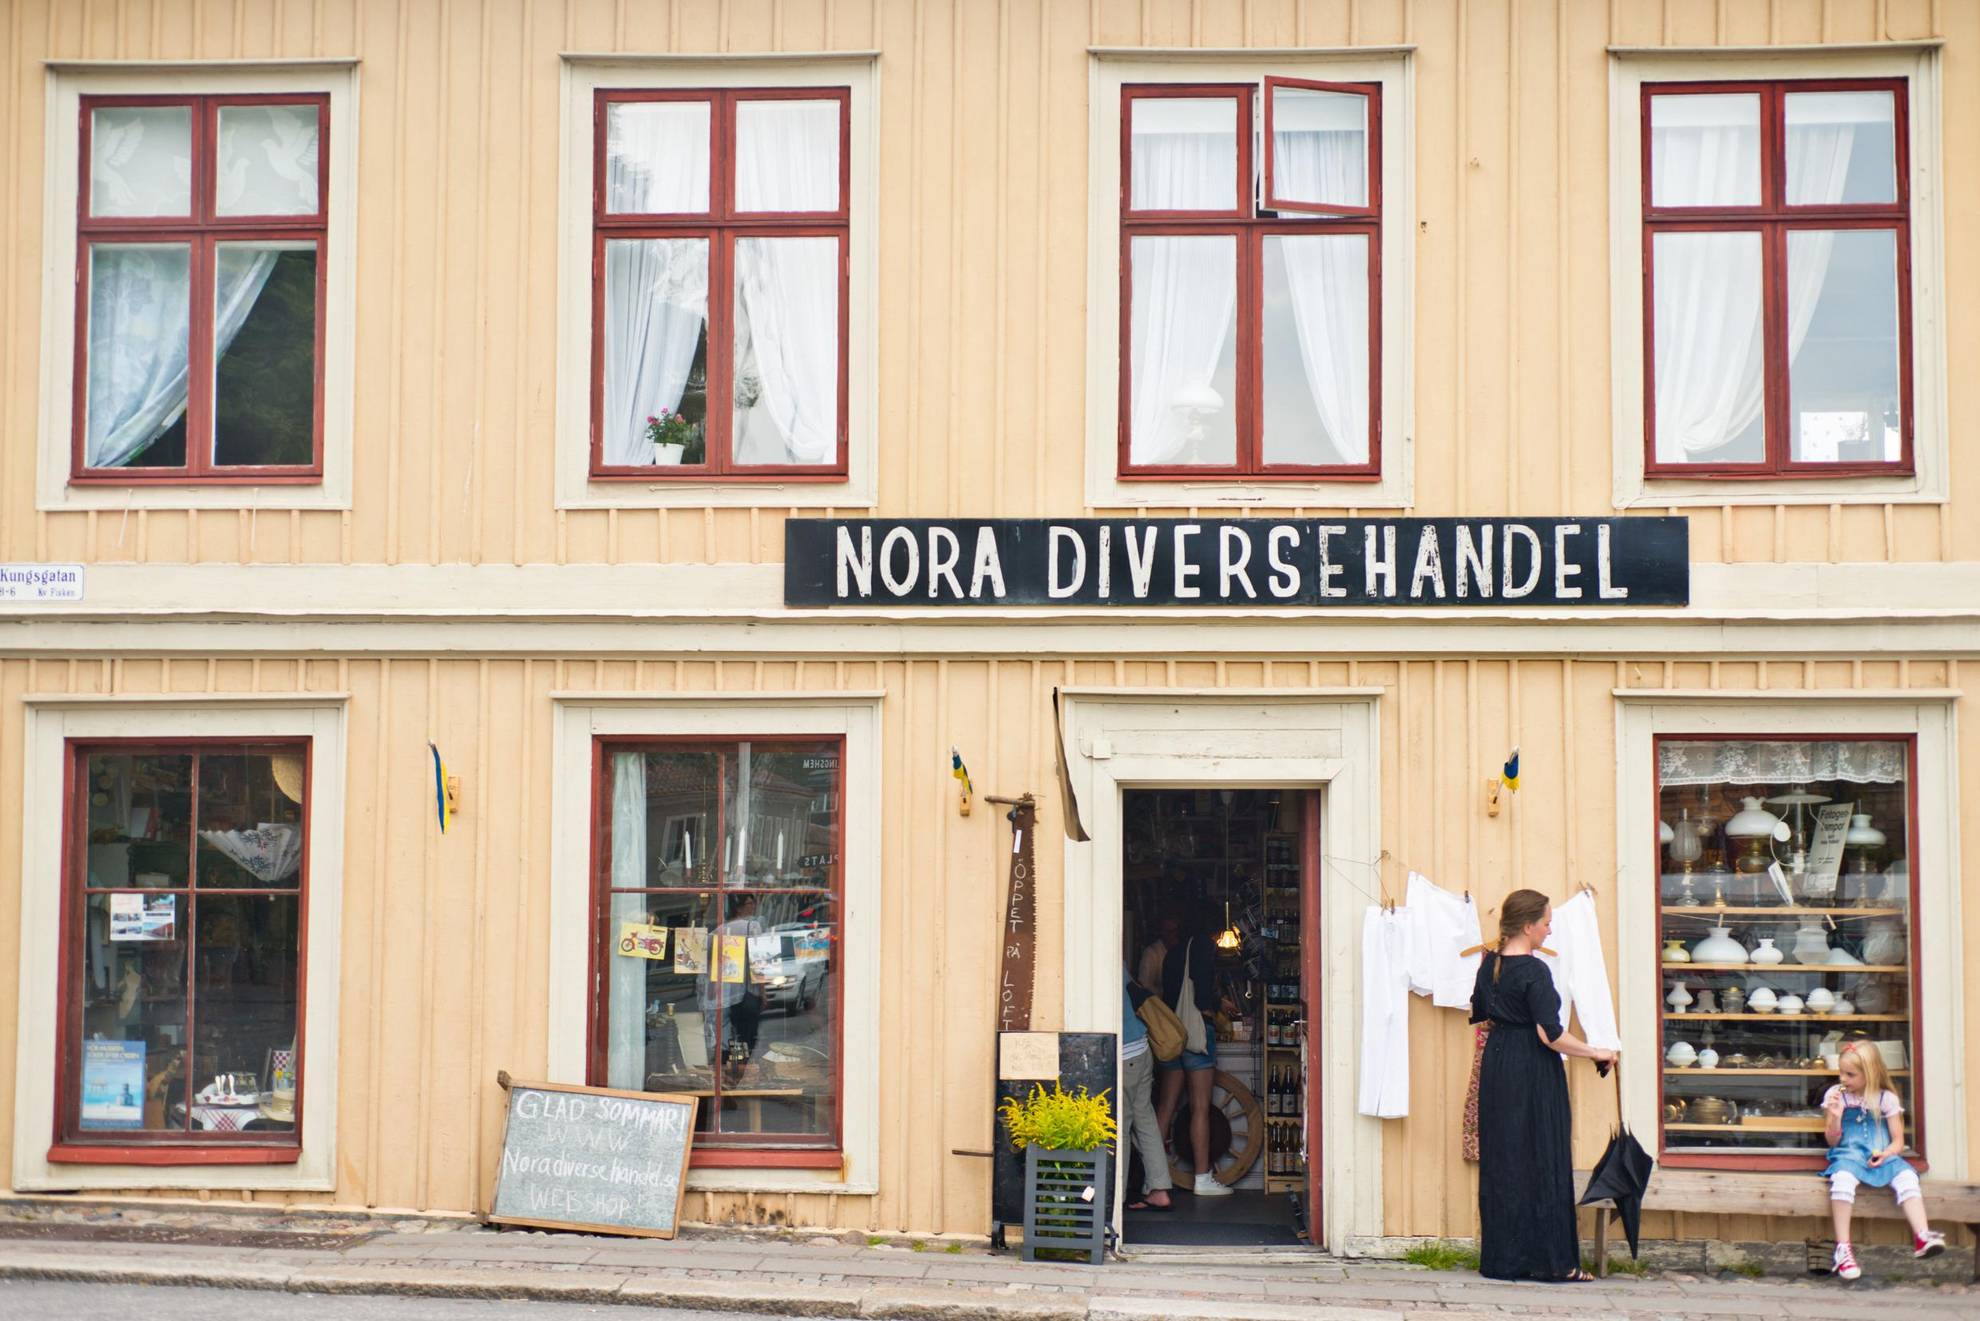 A small shop in a yellow wooden house on a street in a old town. A sign above the entrance says Nora Diversehandel. A woman is standing  and a girl is sitting on a bench in front of the house.